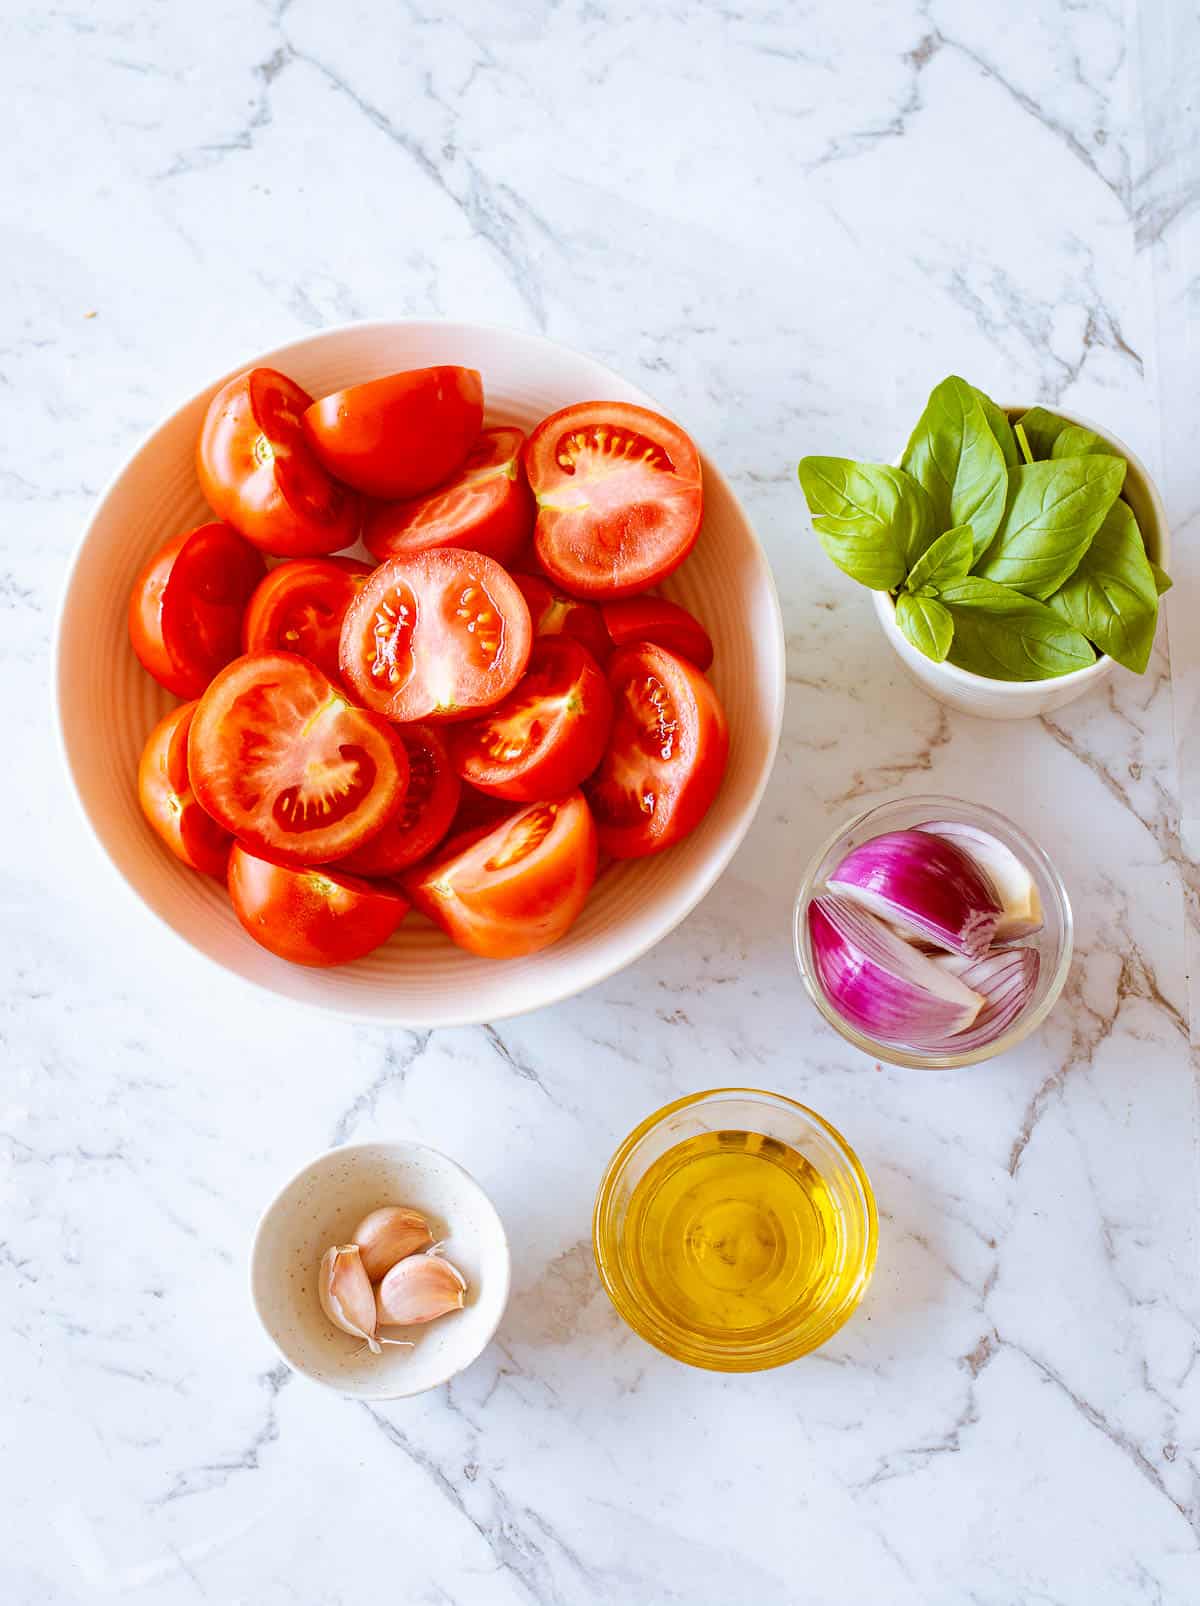 A collection of ingredients used to make Thermomix Tomato Soup.